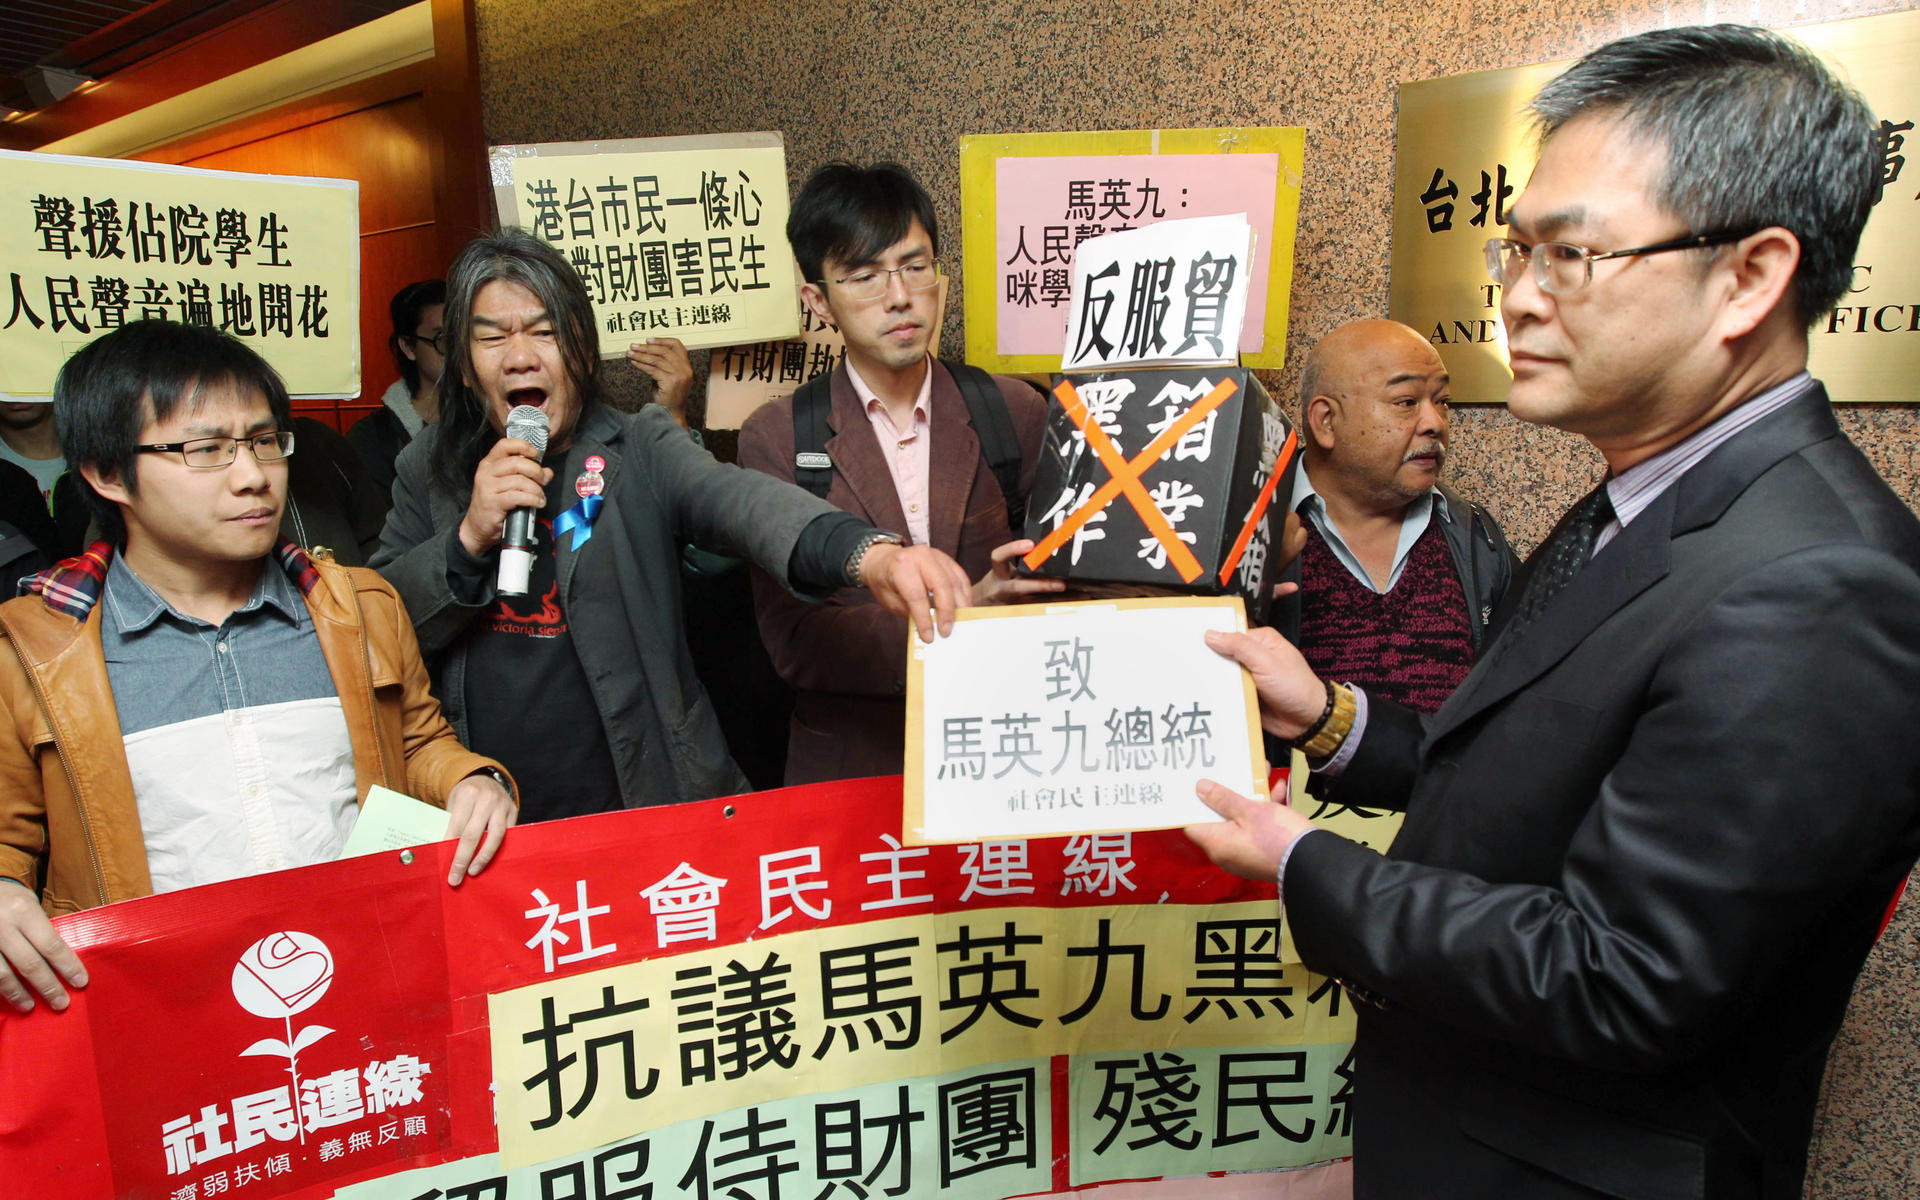 "Long Hair" Leung Kwok-hung (second from left) and others present their petition to the Taipei representative office. Photo: SCMP Pictures